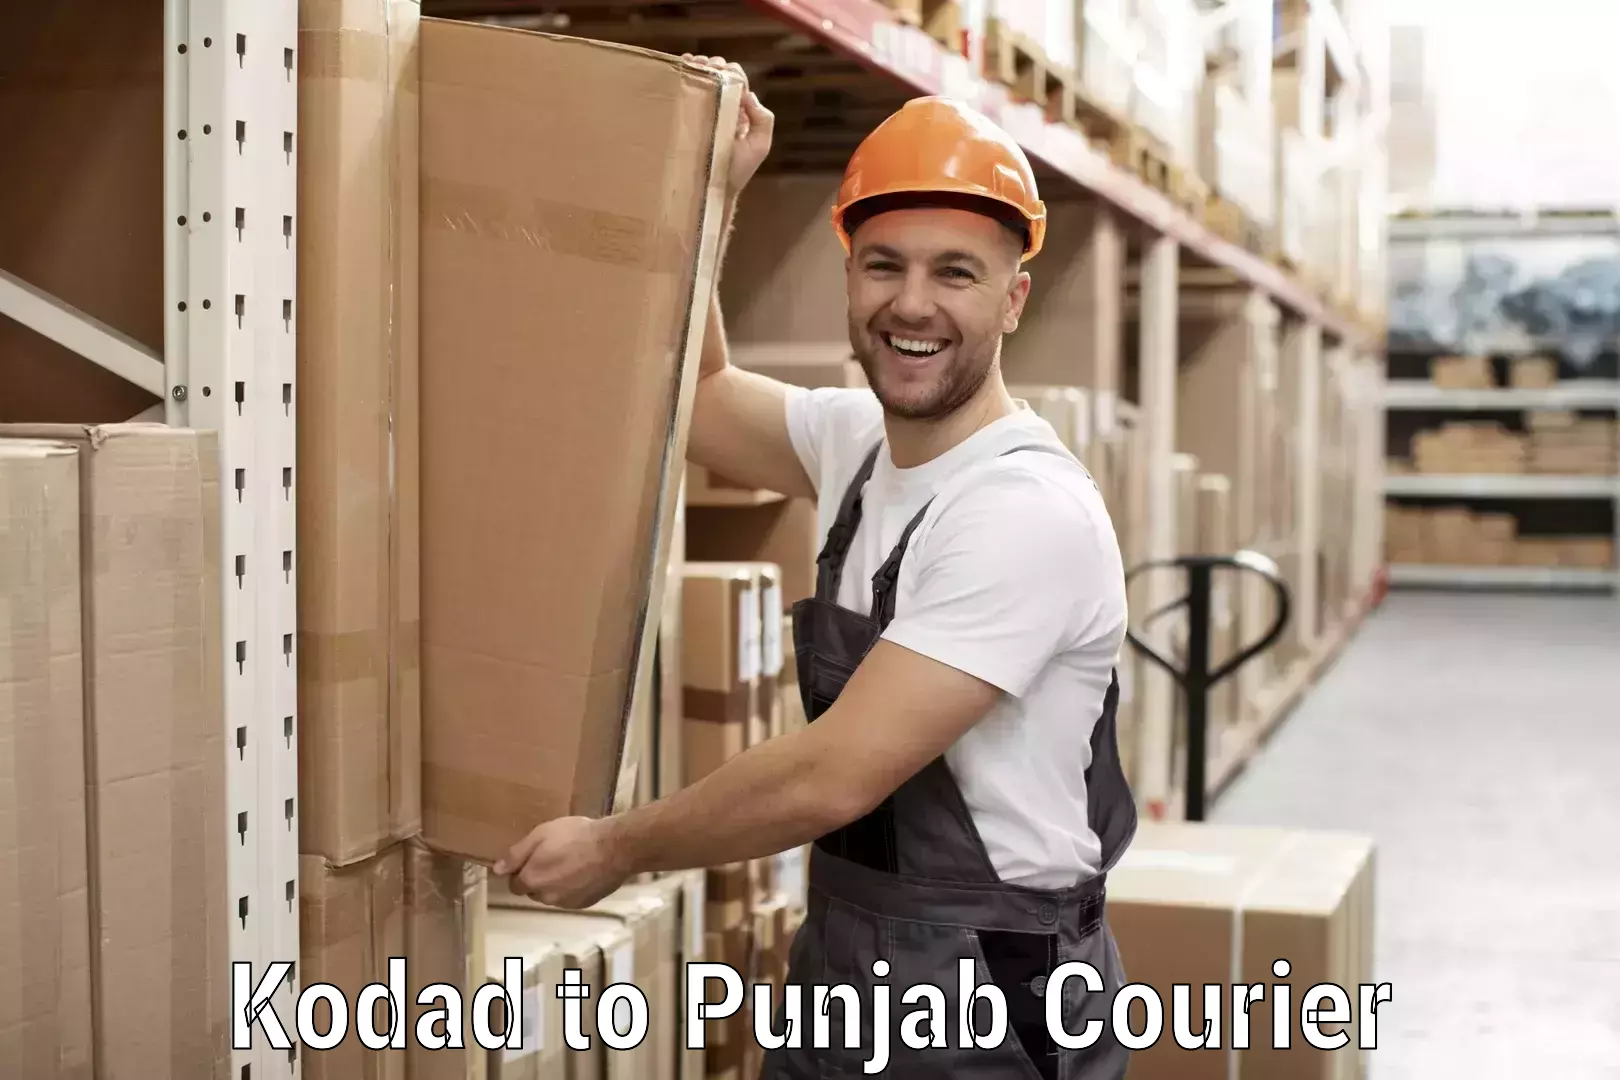 Customizable shipping options Kodad to Sultanpur Lodhi